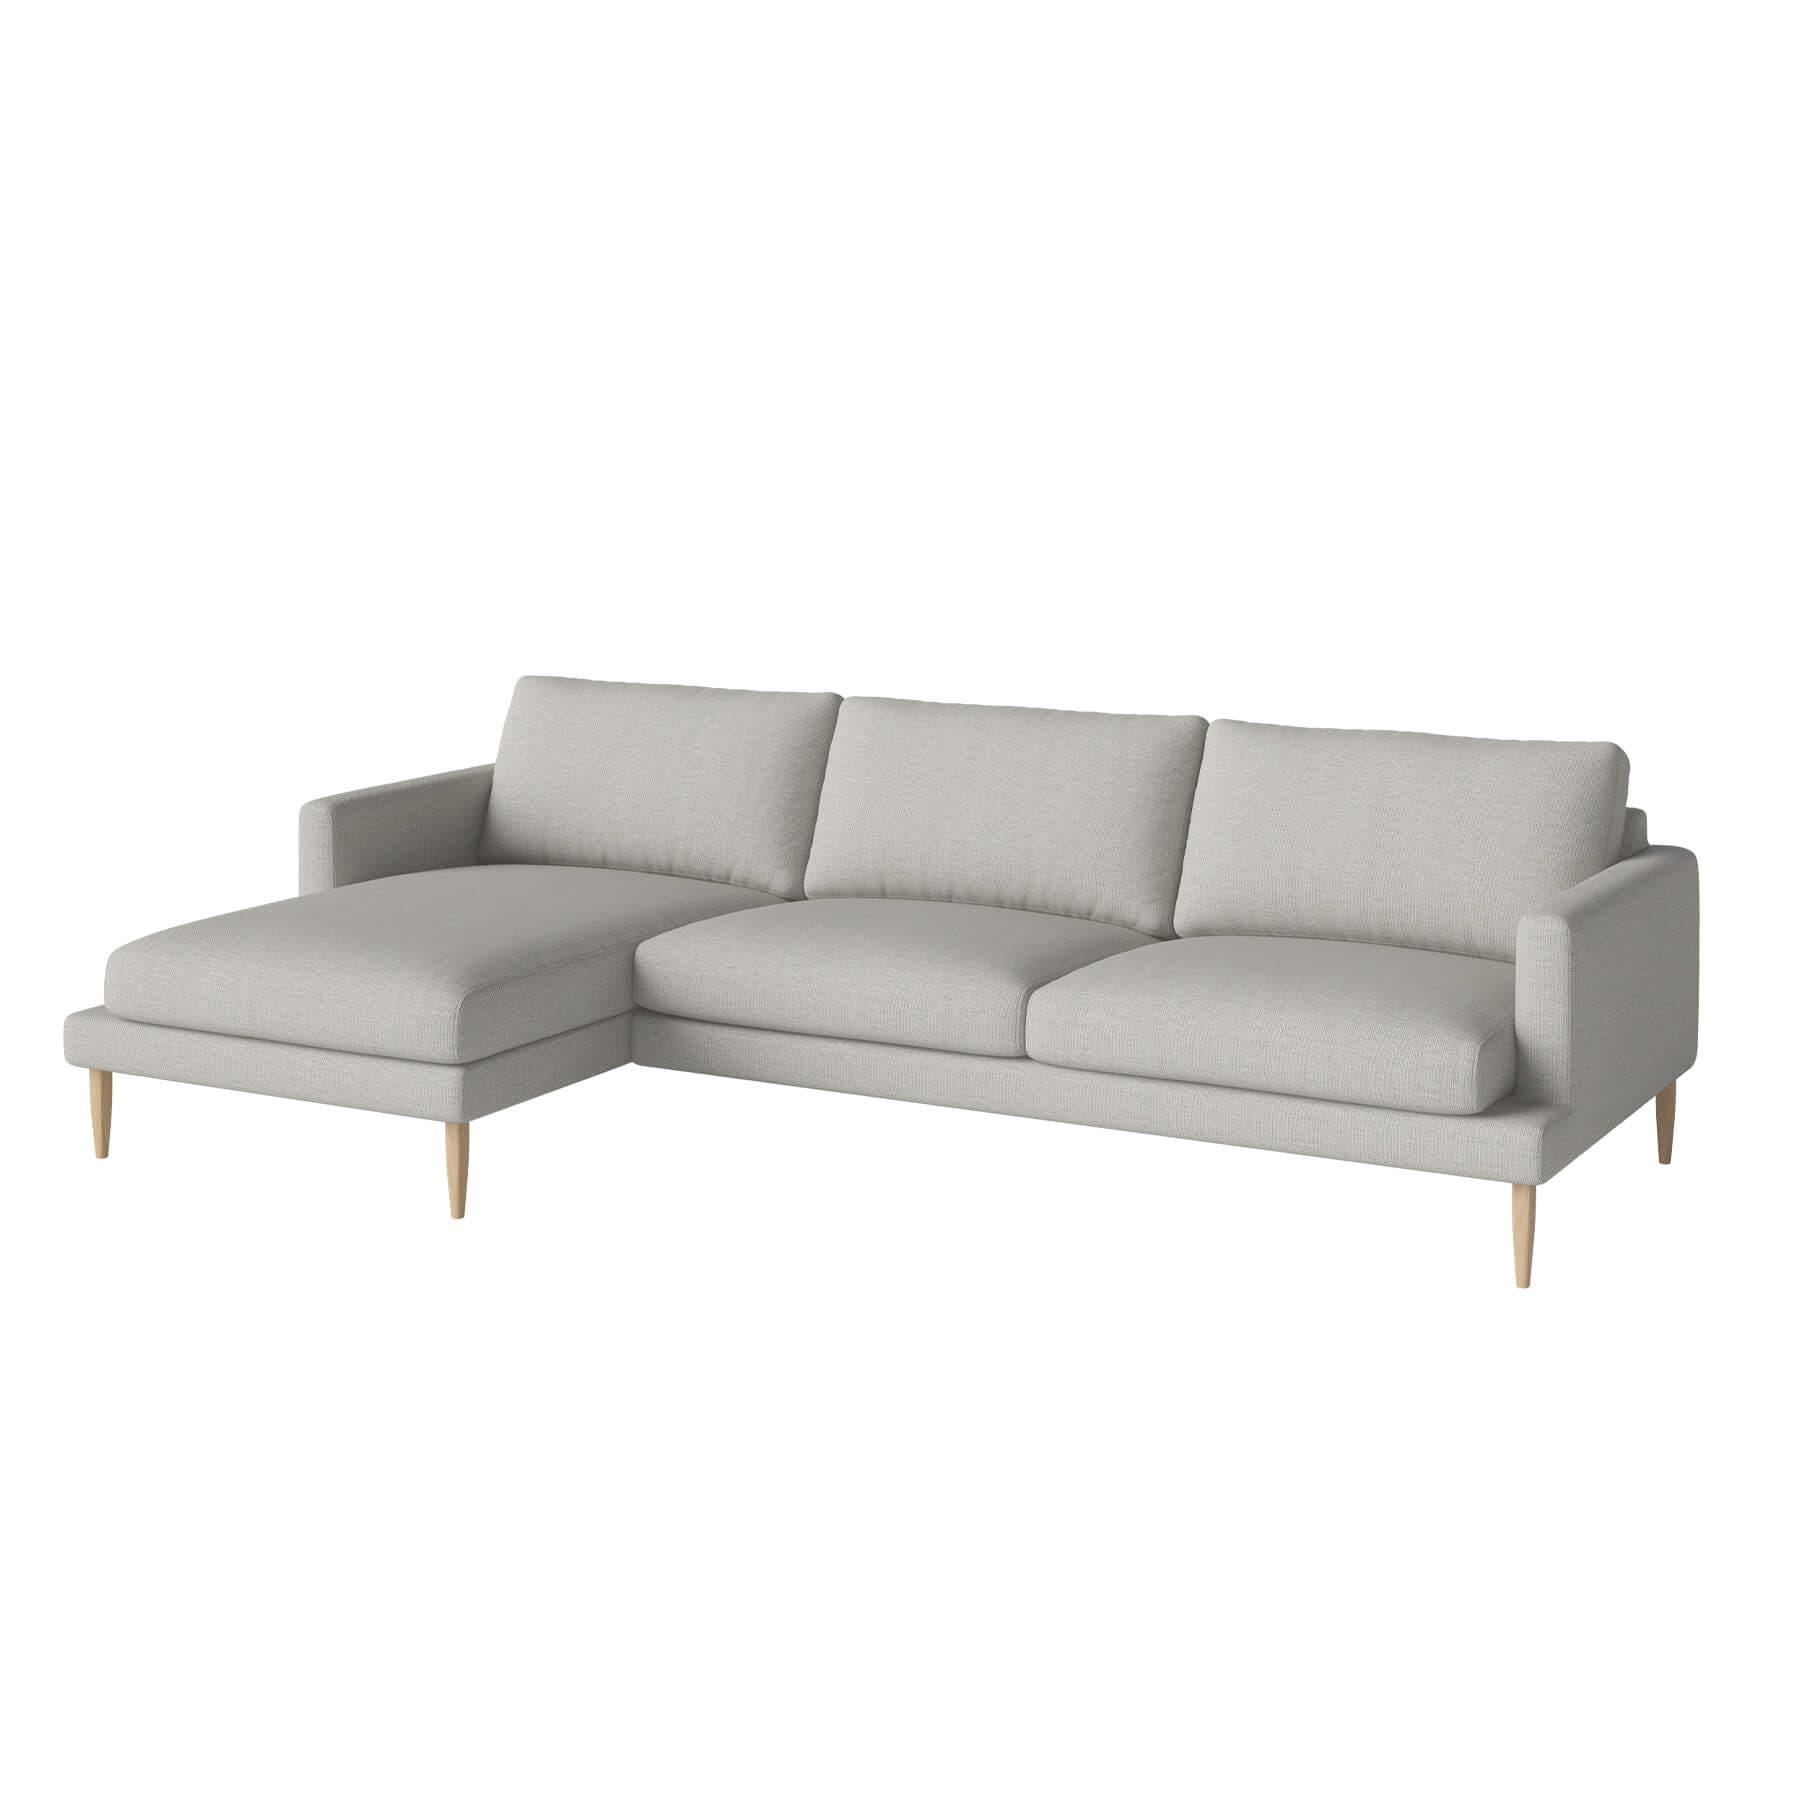 Bolia Veneda Sofa 35 Seater Sofa With Chaise Longue White Oiled Oak London Dust Green Left Grey Designer Furniture From Holloways Of Ludlow